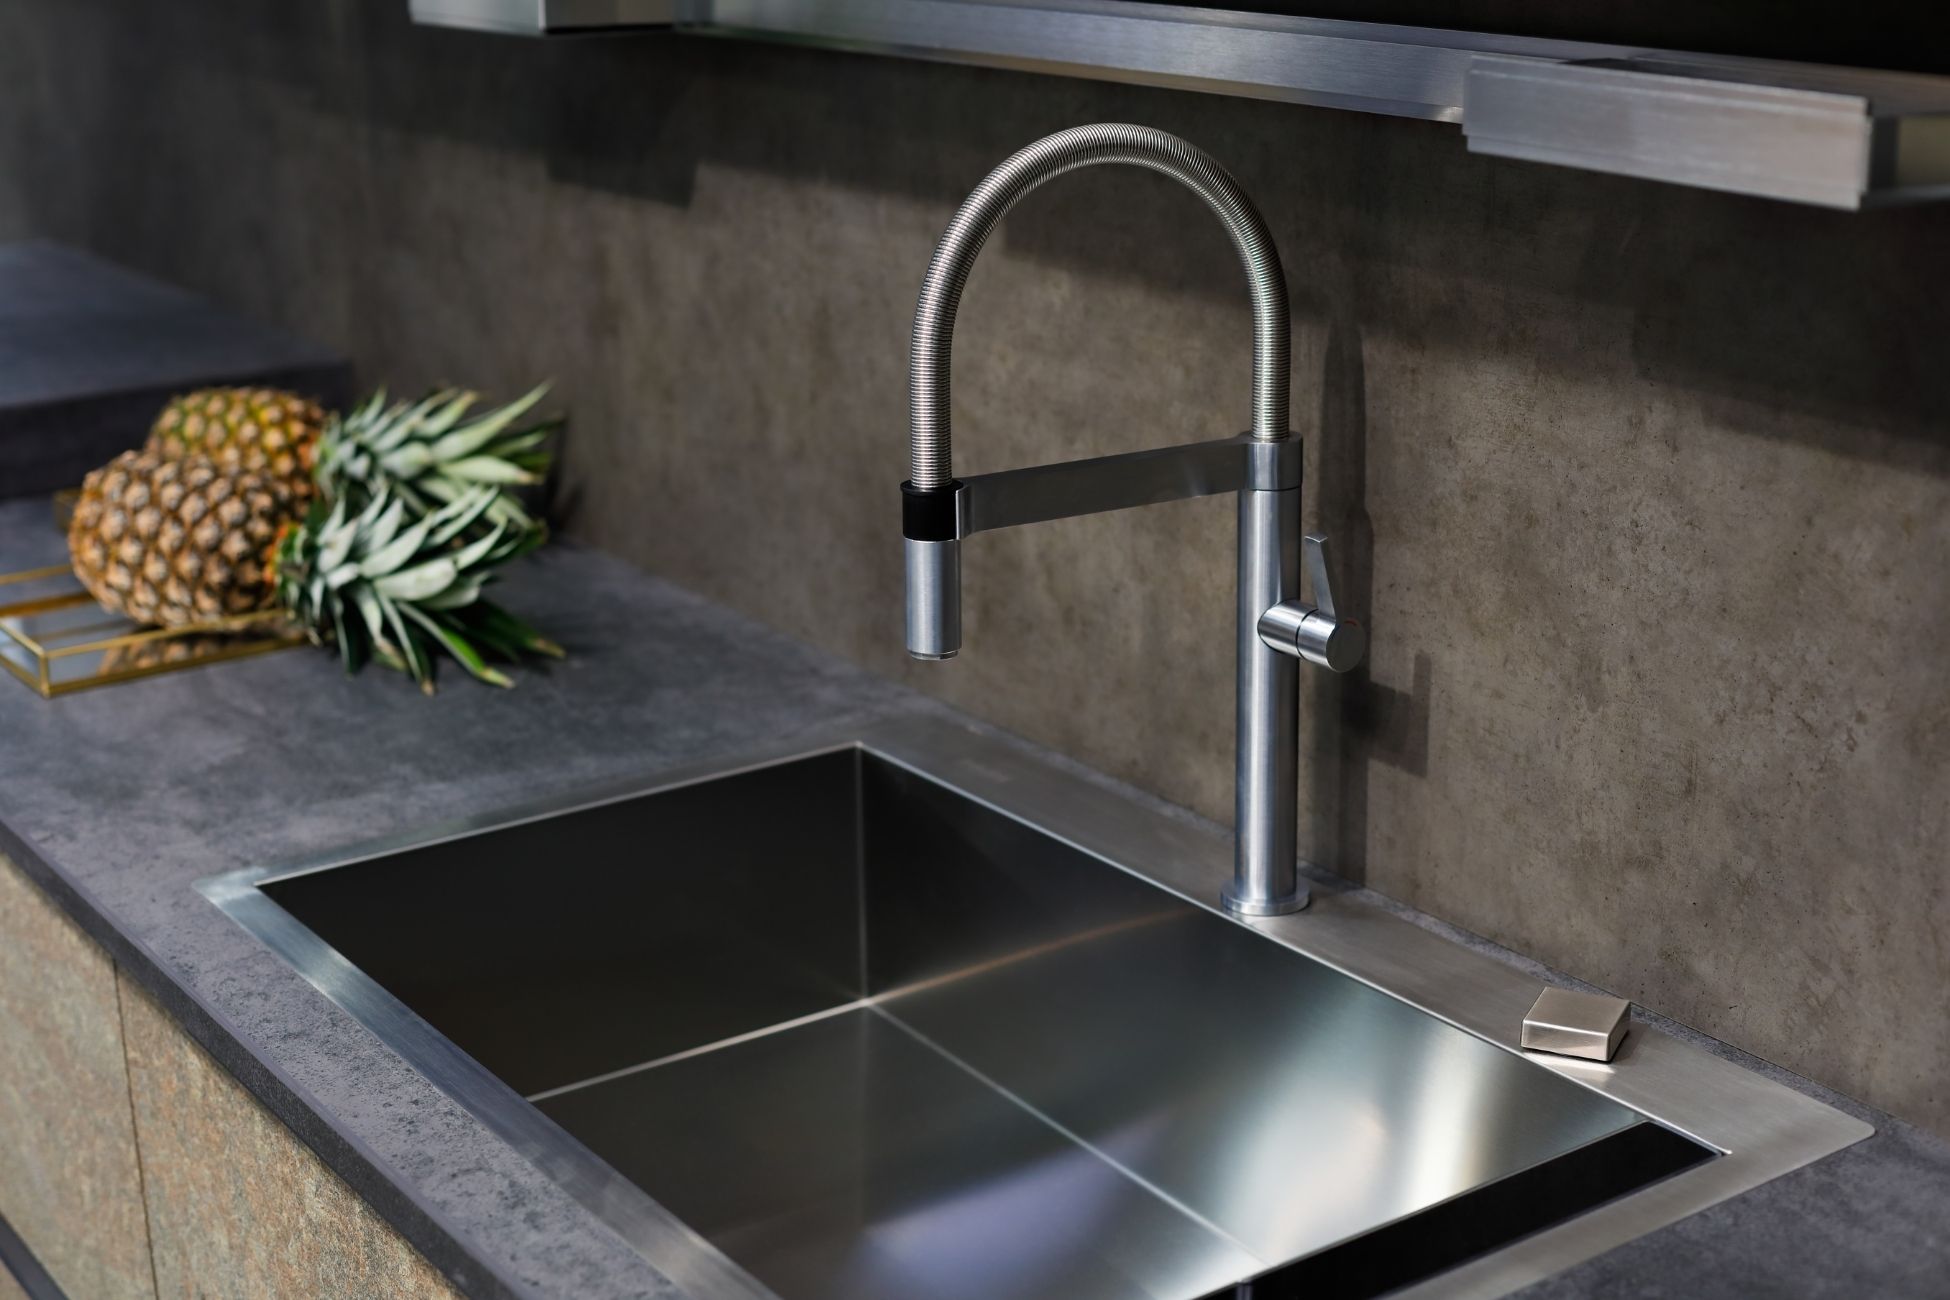 Selecting a Kitchen Faucet